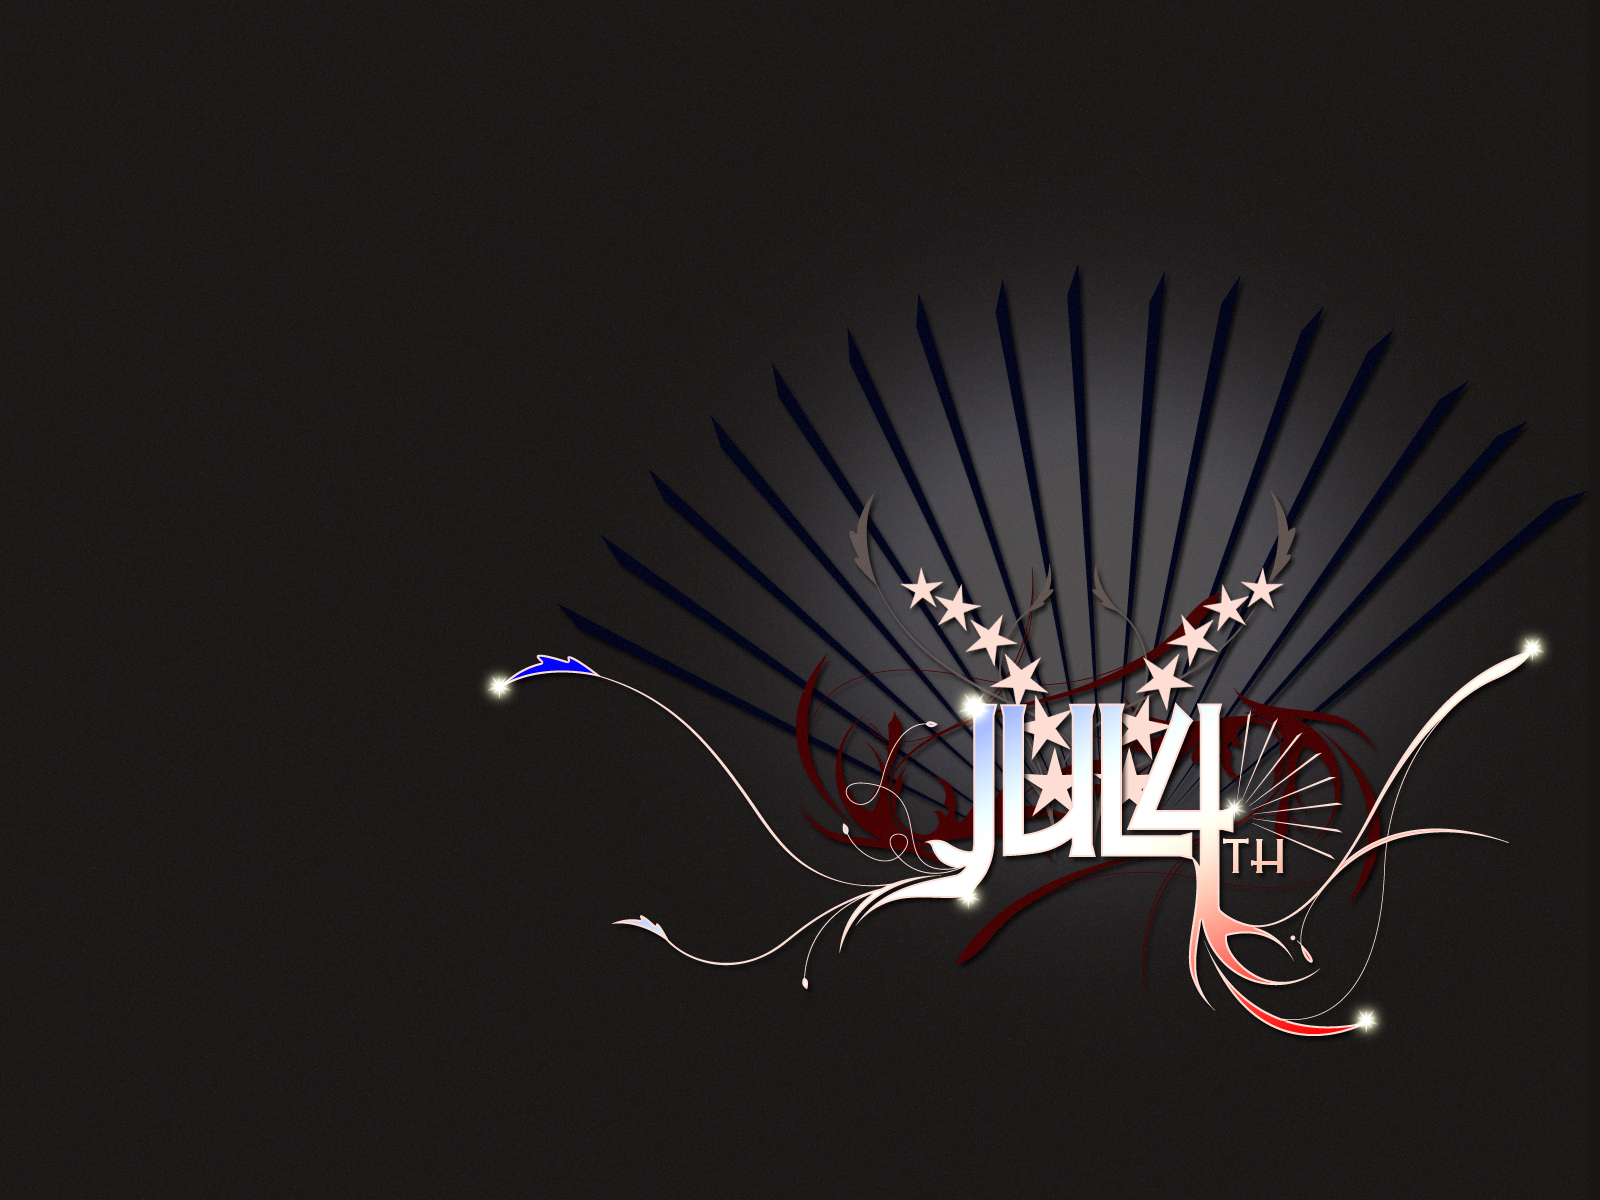 4th Of July Wallpaper Crucial Design